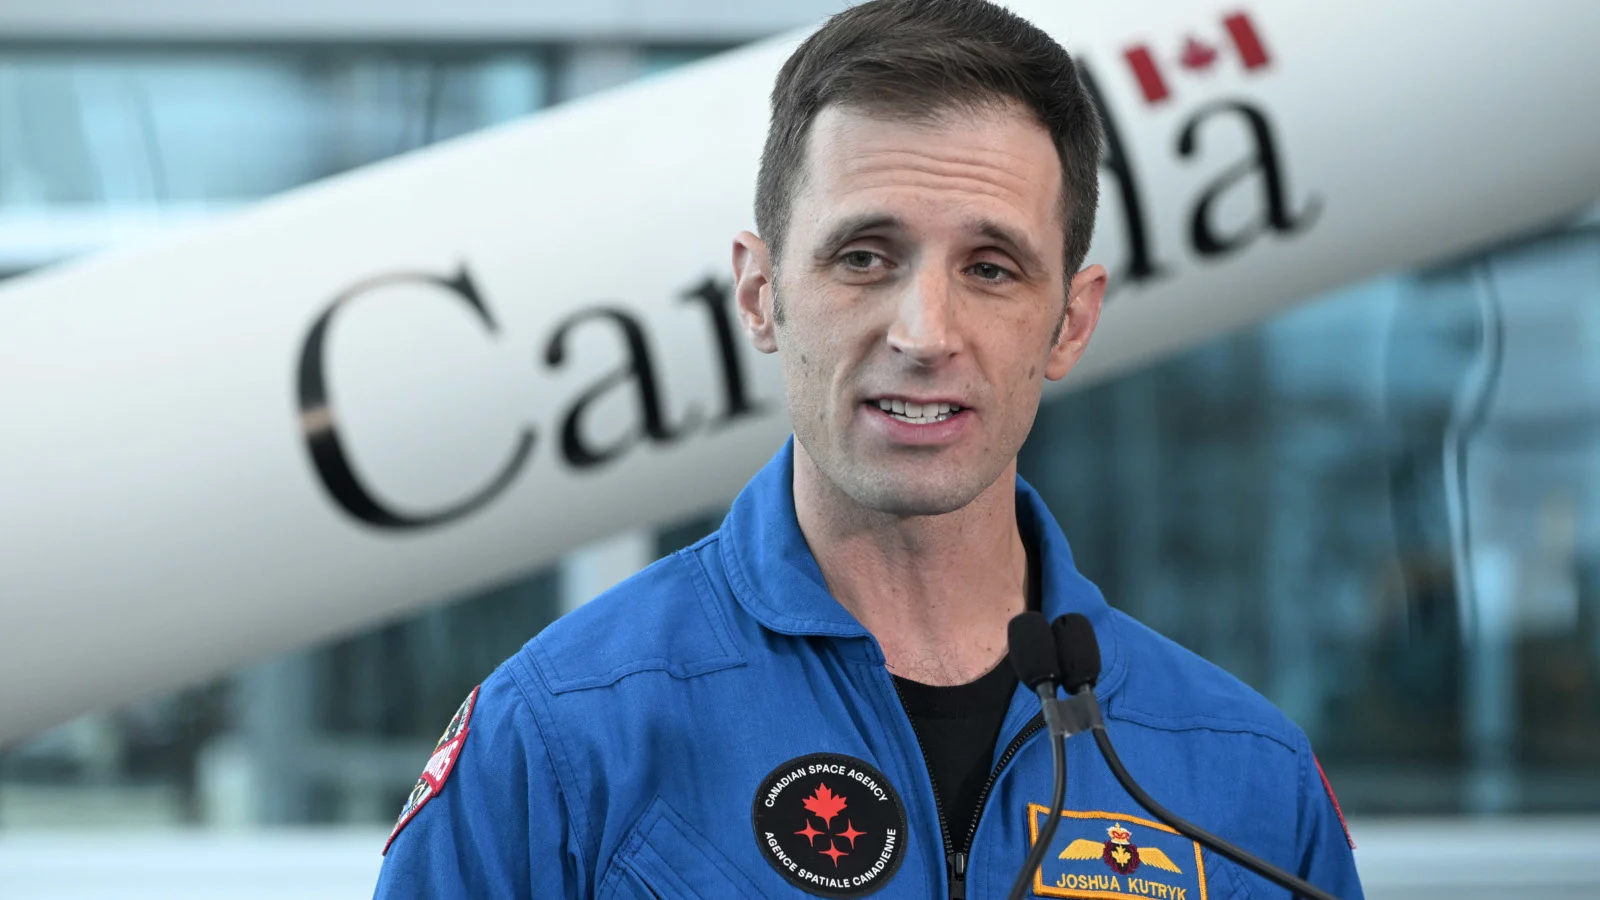 CSA astronaut Joshua Kutryk assigned to a mission aboard the International Space Station